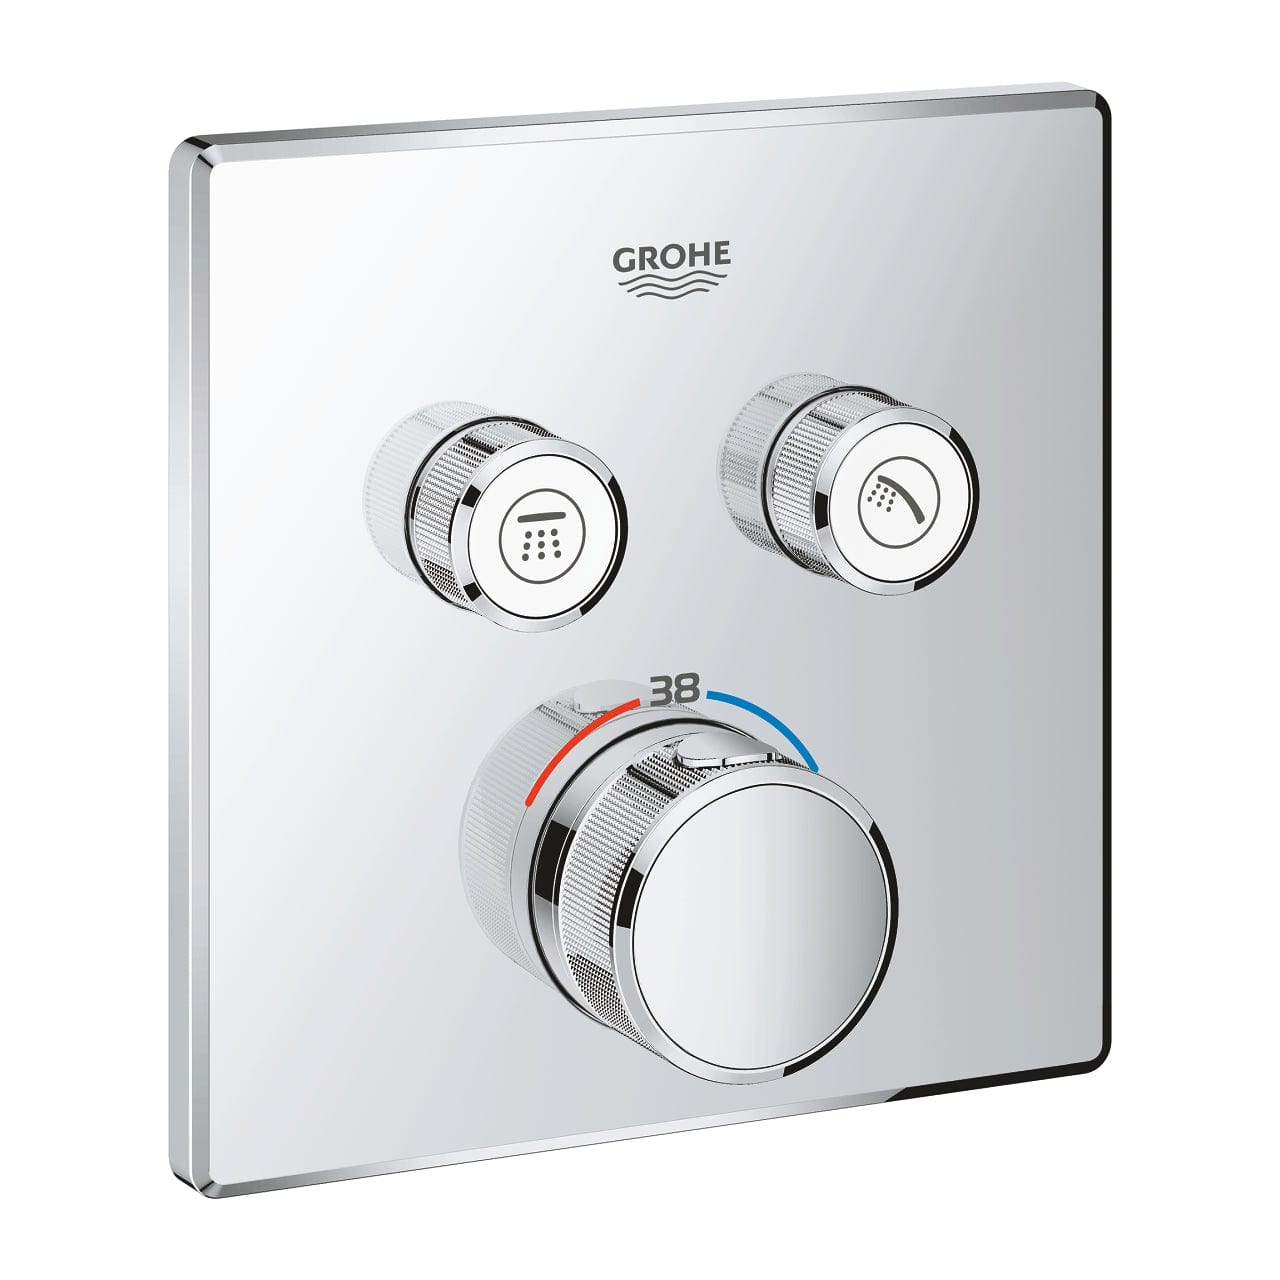 Grohe Grohtherm Smartcontrol Thermostat for Concealed Installation with 2 Valves - 29124000 | Supply Master | Accra, Ghana Bathroom Faucet Buy Tools hardware Building materials